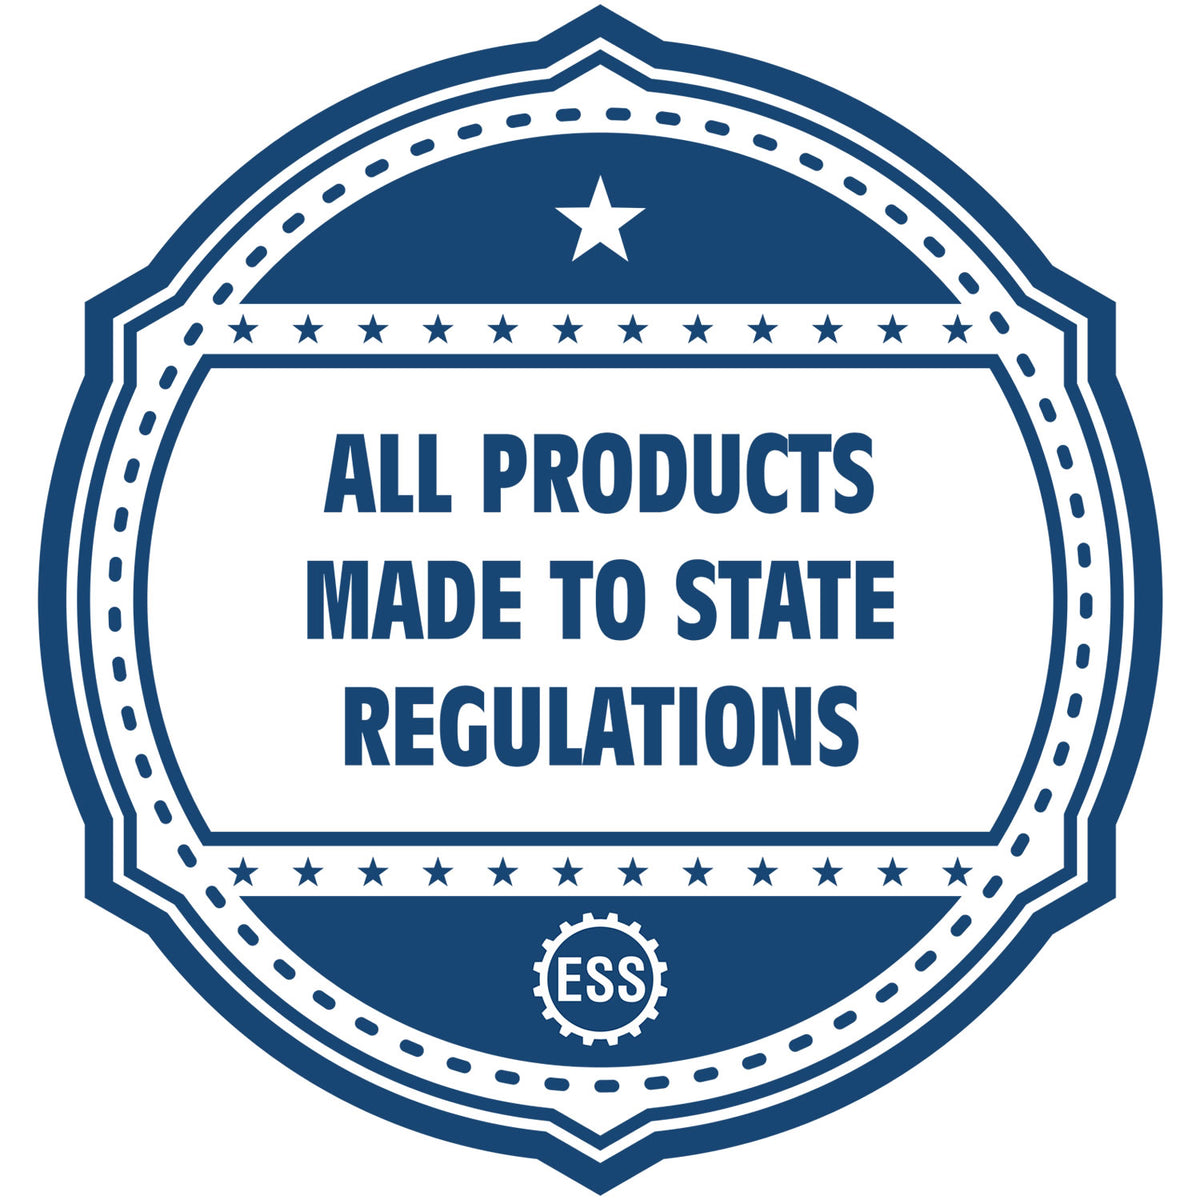 An icon or badge element for the MaxLight Premium Pre-Inked Idaho Rectangular Notarial Stamp showing that this product is made in compliance with state regulations.